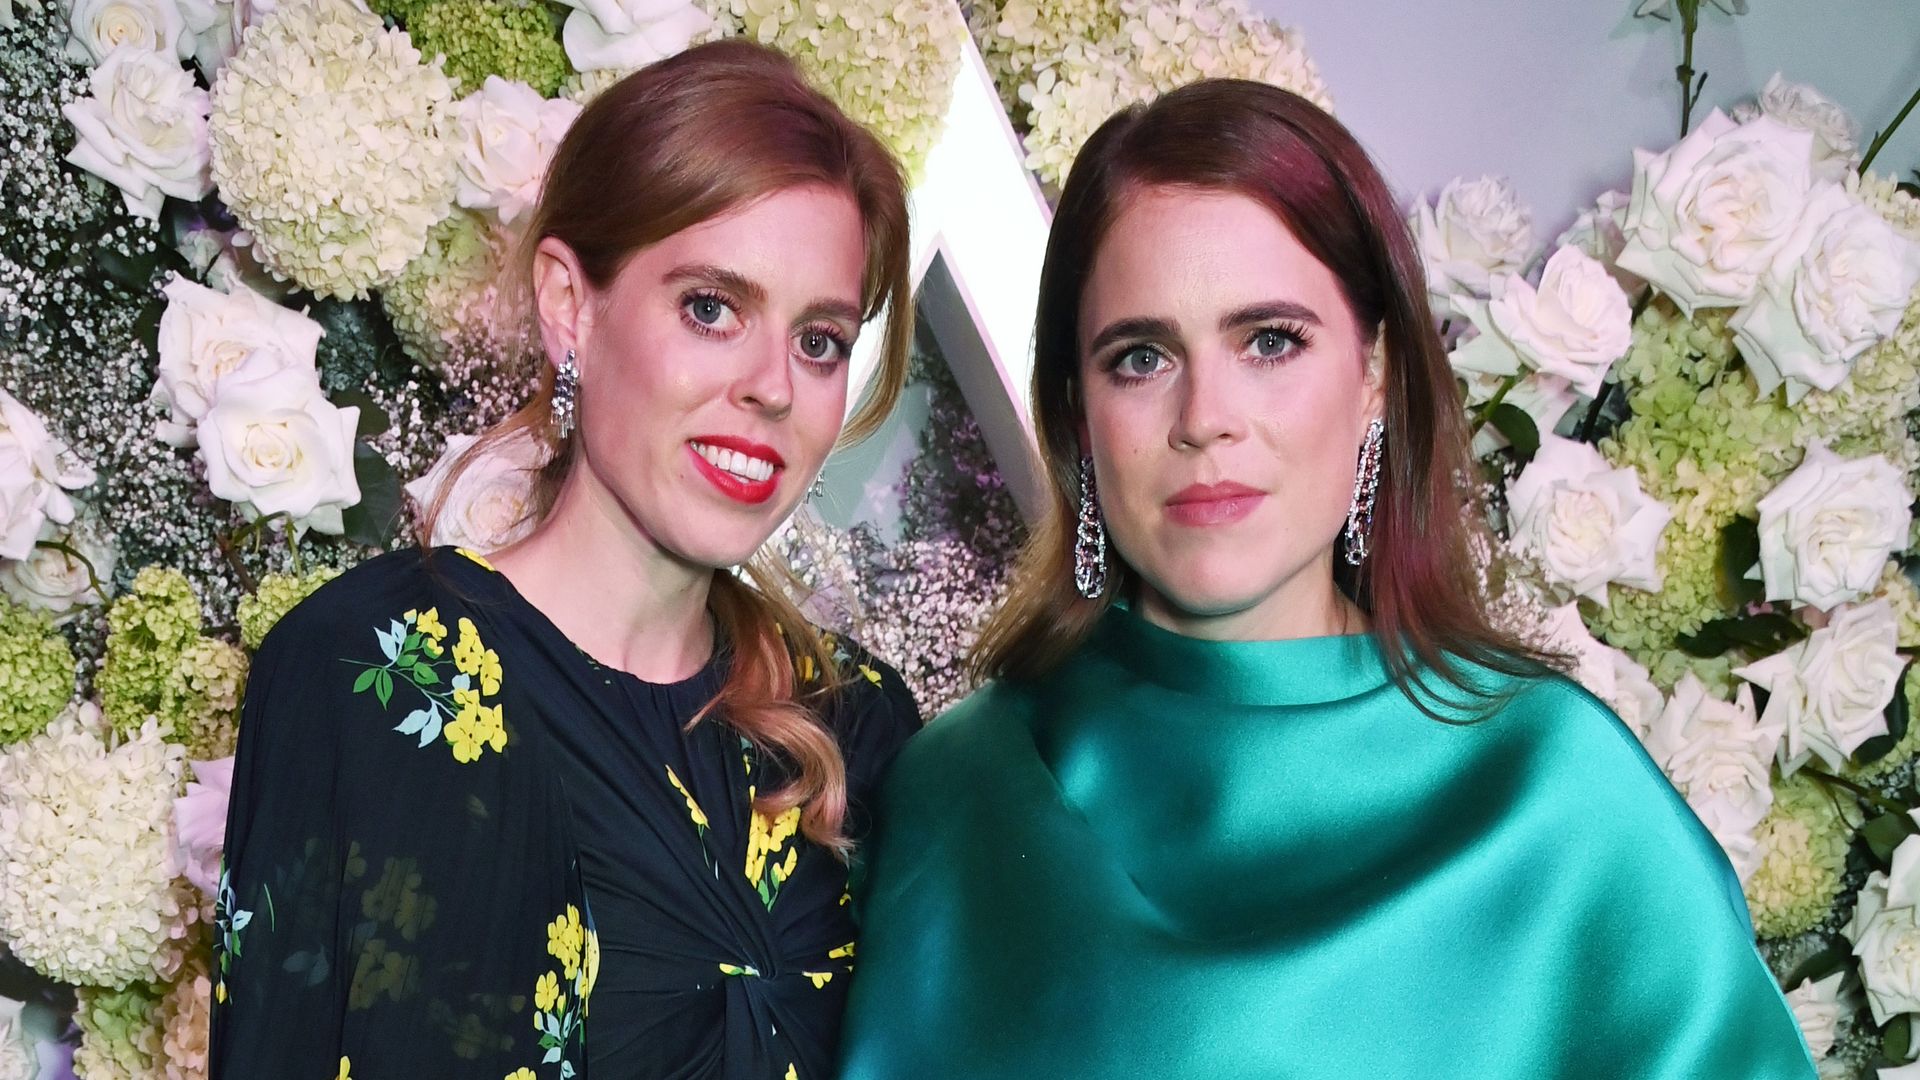 Princess Beatrice and Princess Eugenie against floral backdrop